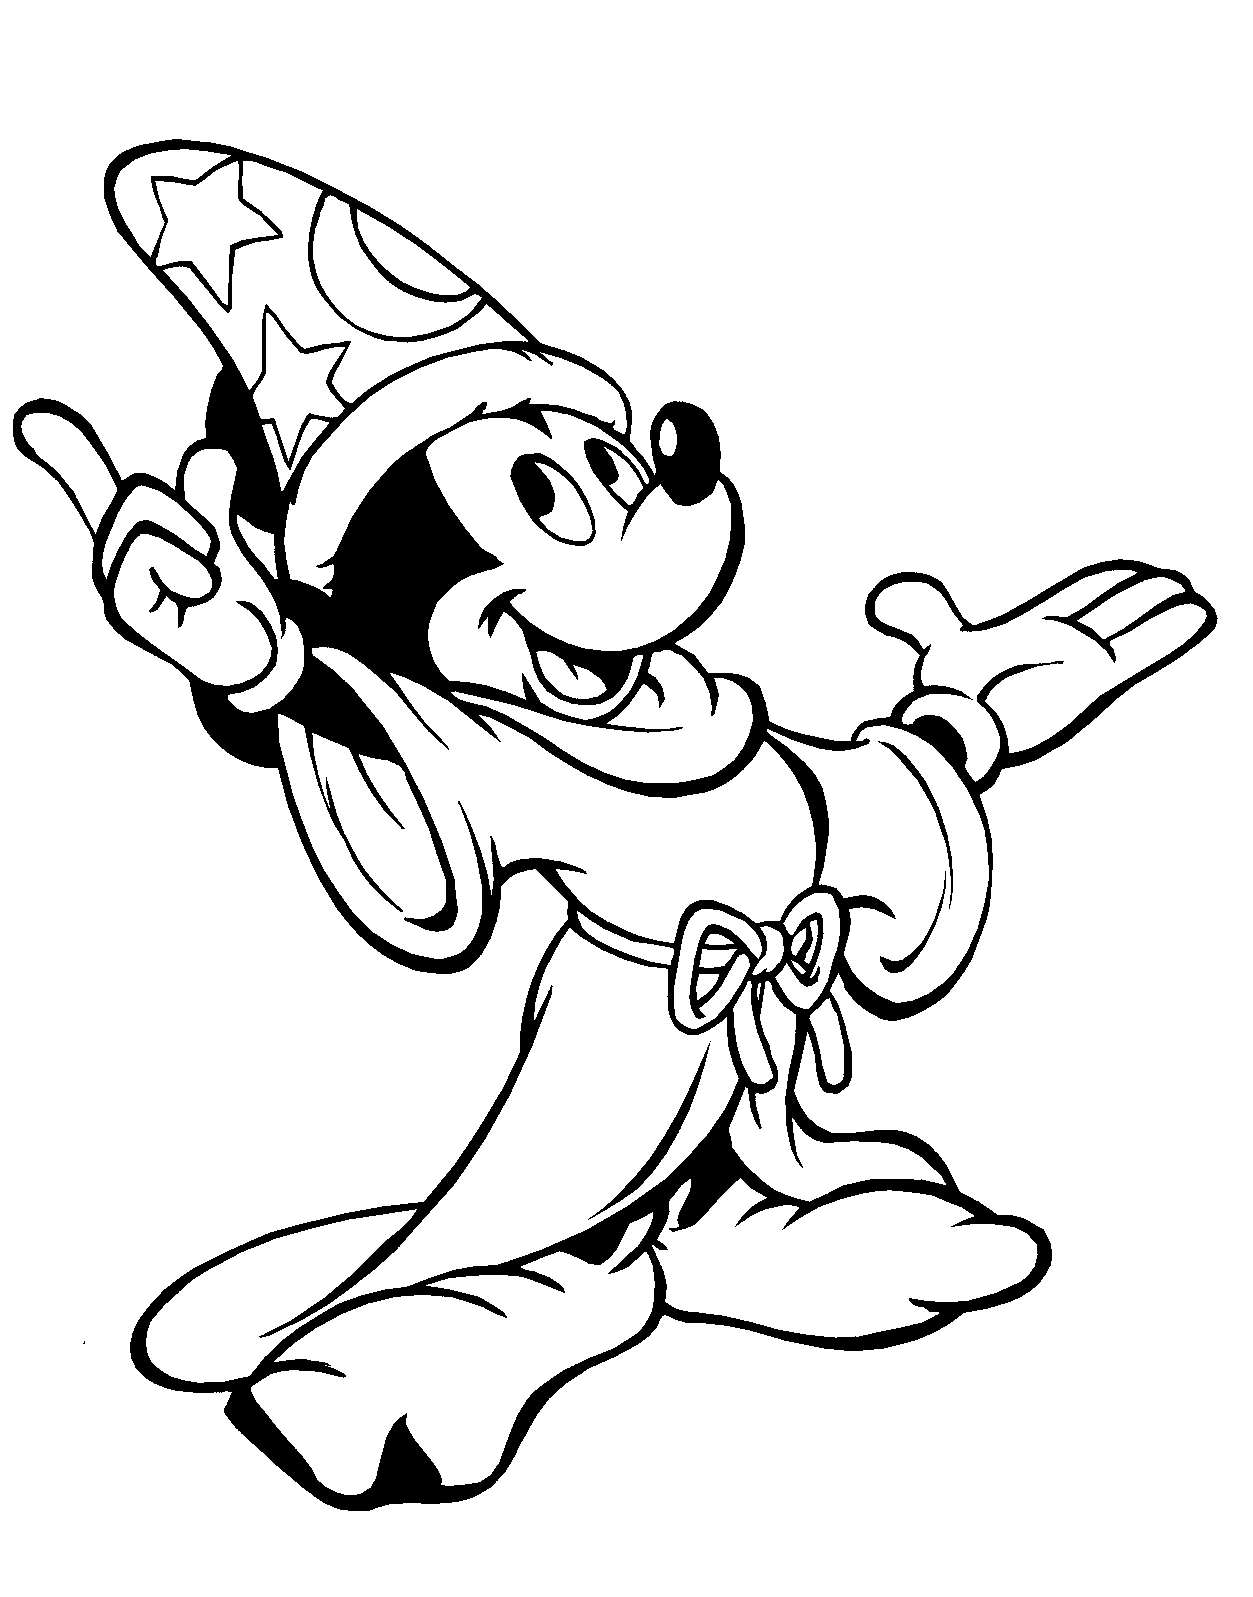 mickey mouse coloring pictures free printable mickey mouse coloring pages for kids mouse pictures coloring mickey 